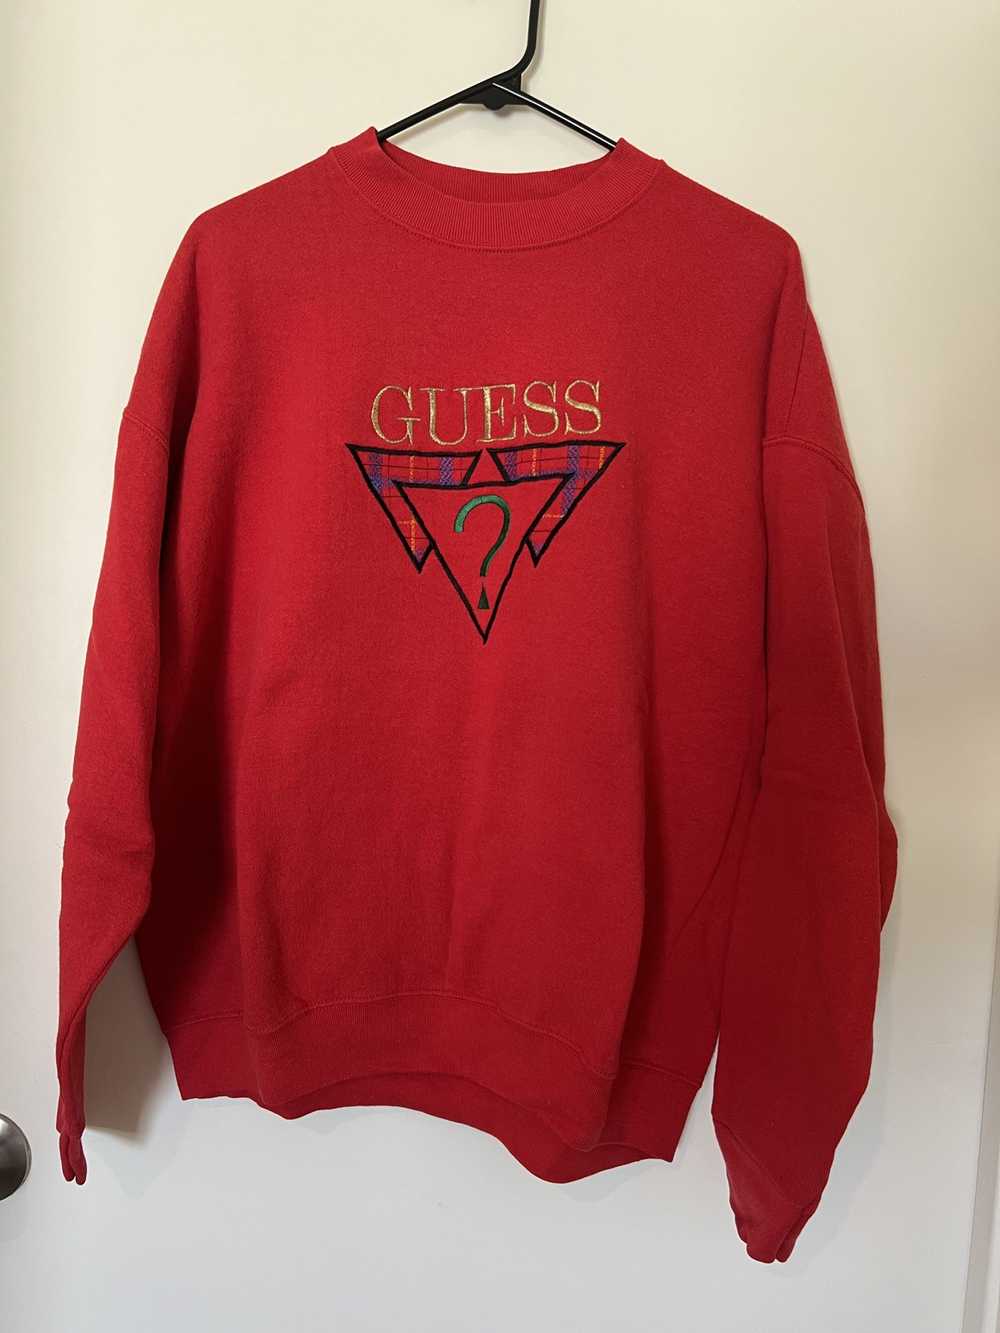 Guess Vintage Guess Tri-Angle Sweater - image 1